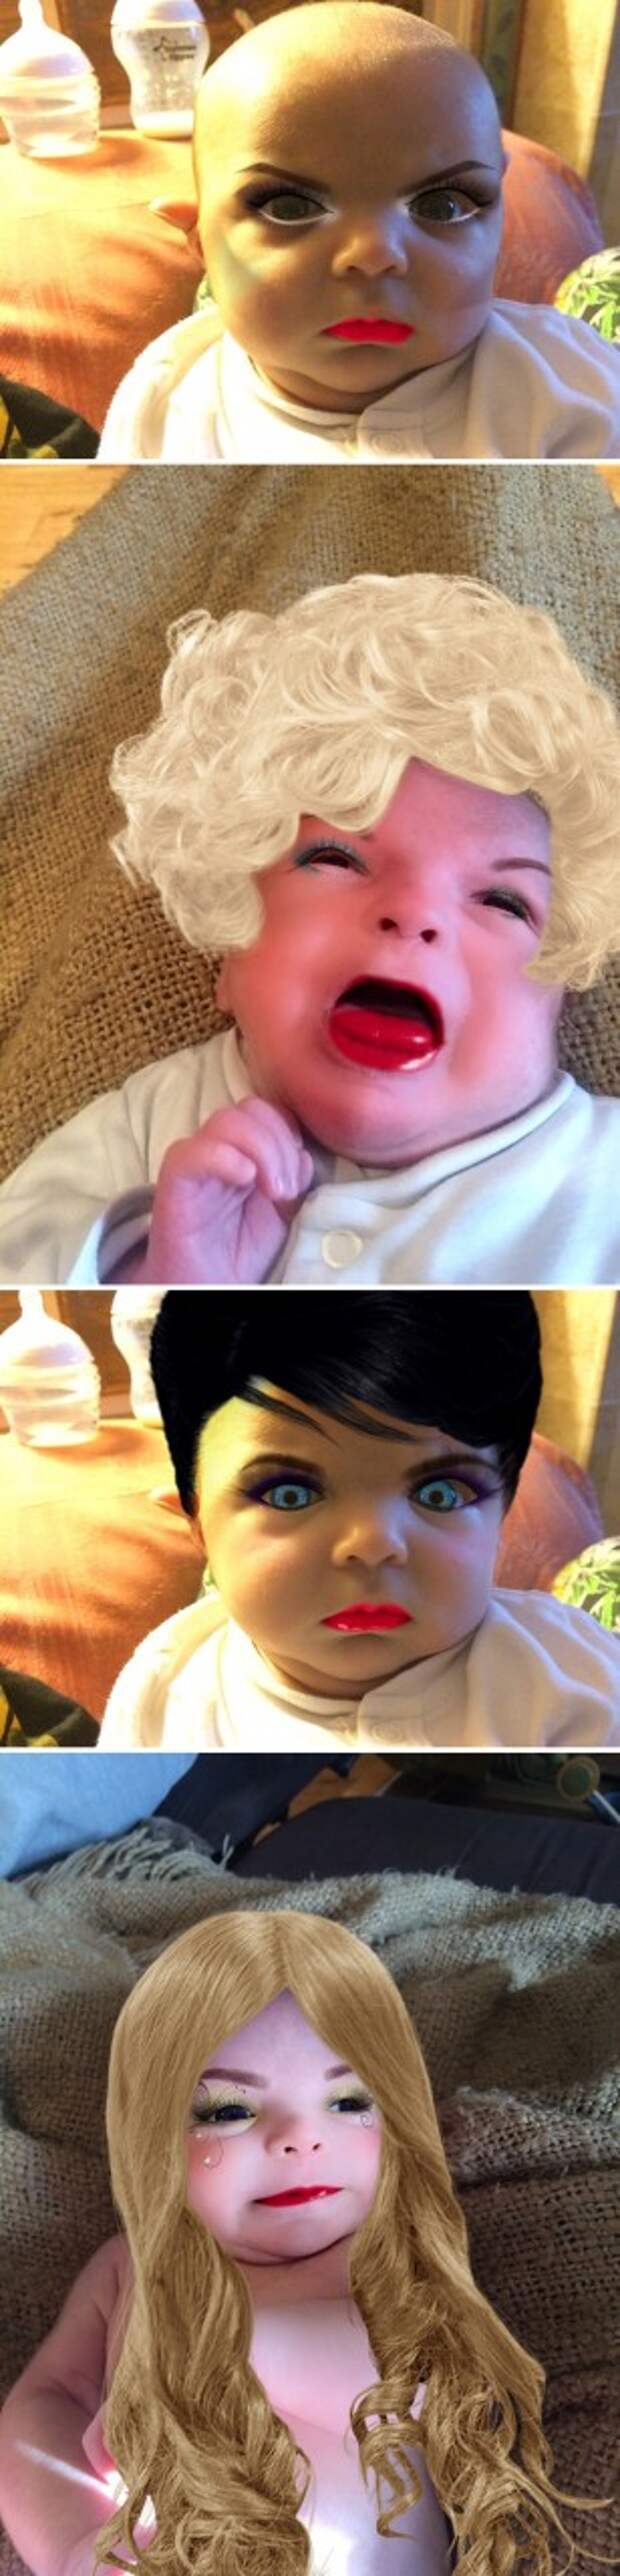 I Used A Make Up App On My 7 Week-Old-Son